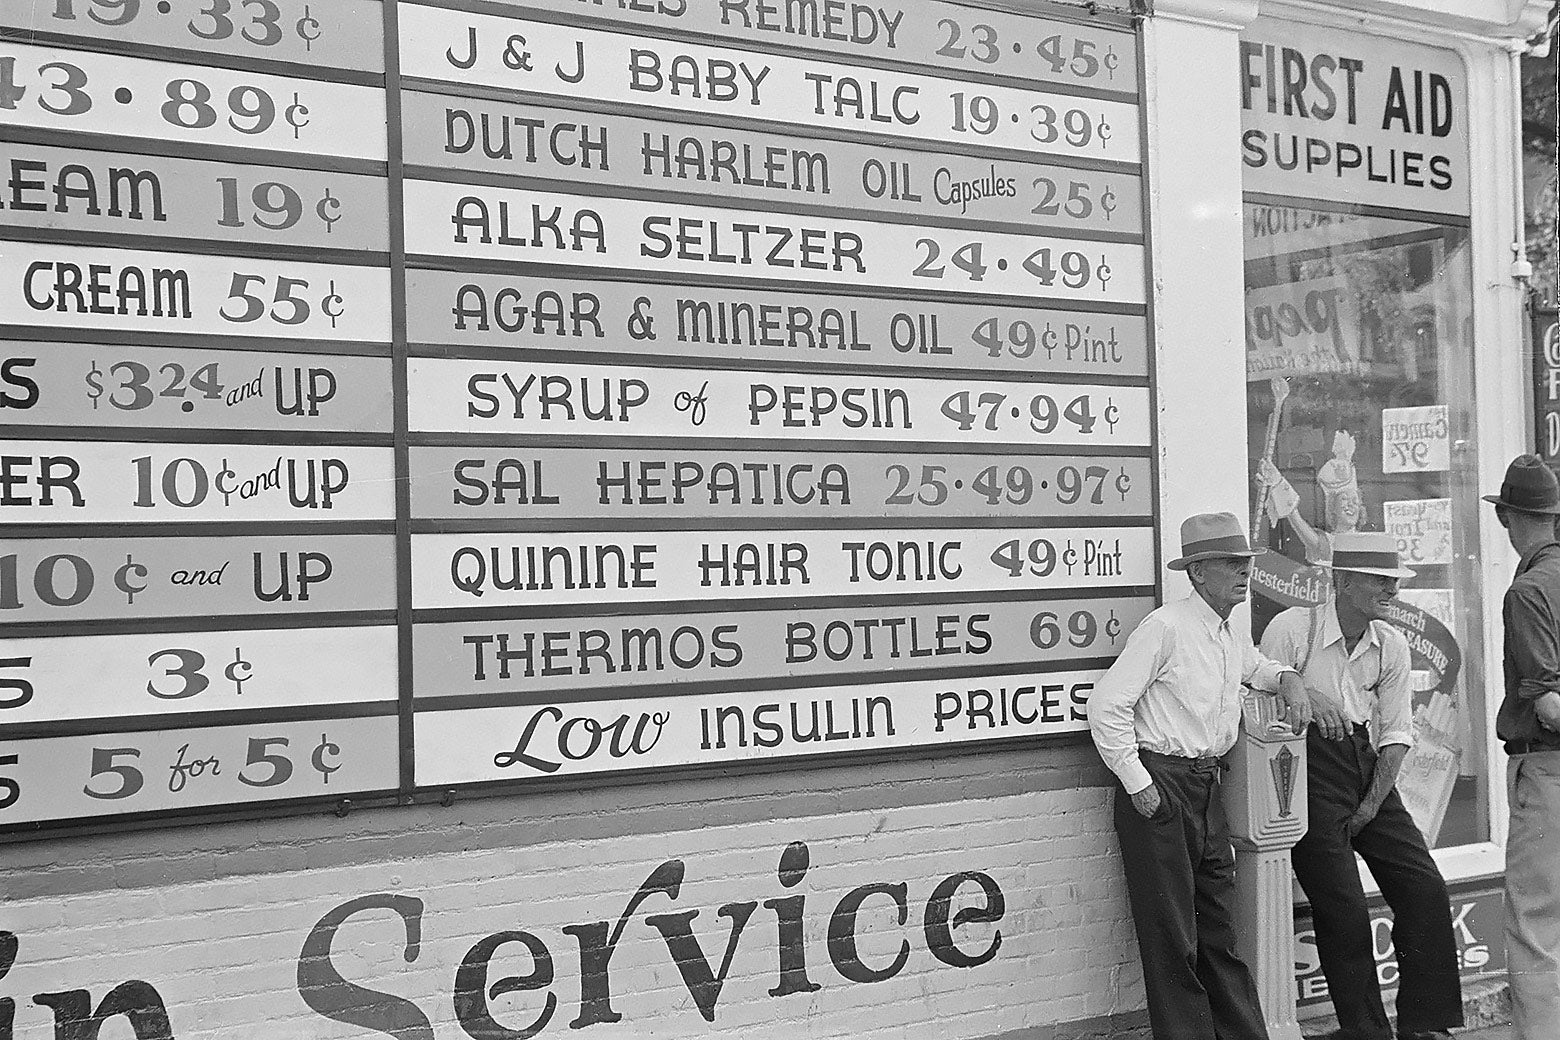 Three men standing in front of a drug story in Ohio with a large outdoor menu of drugs, tonics, and remedies, in 1938